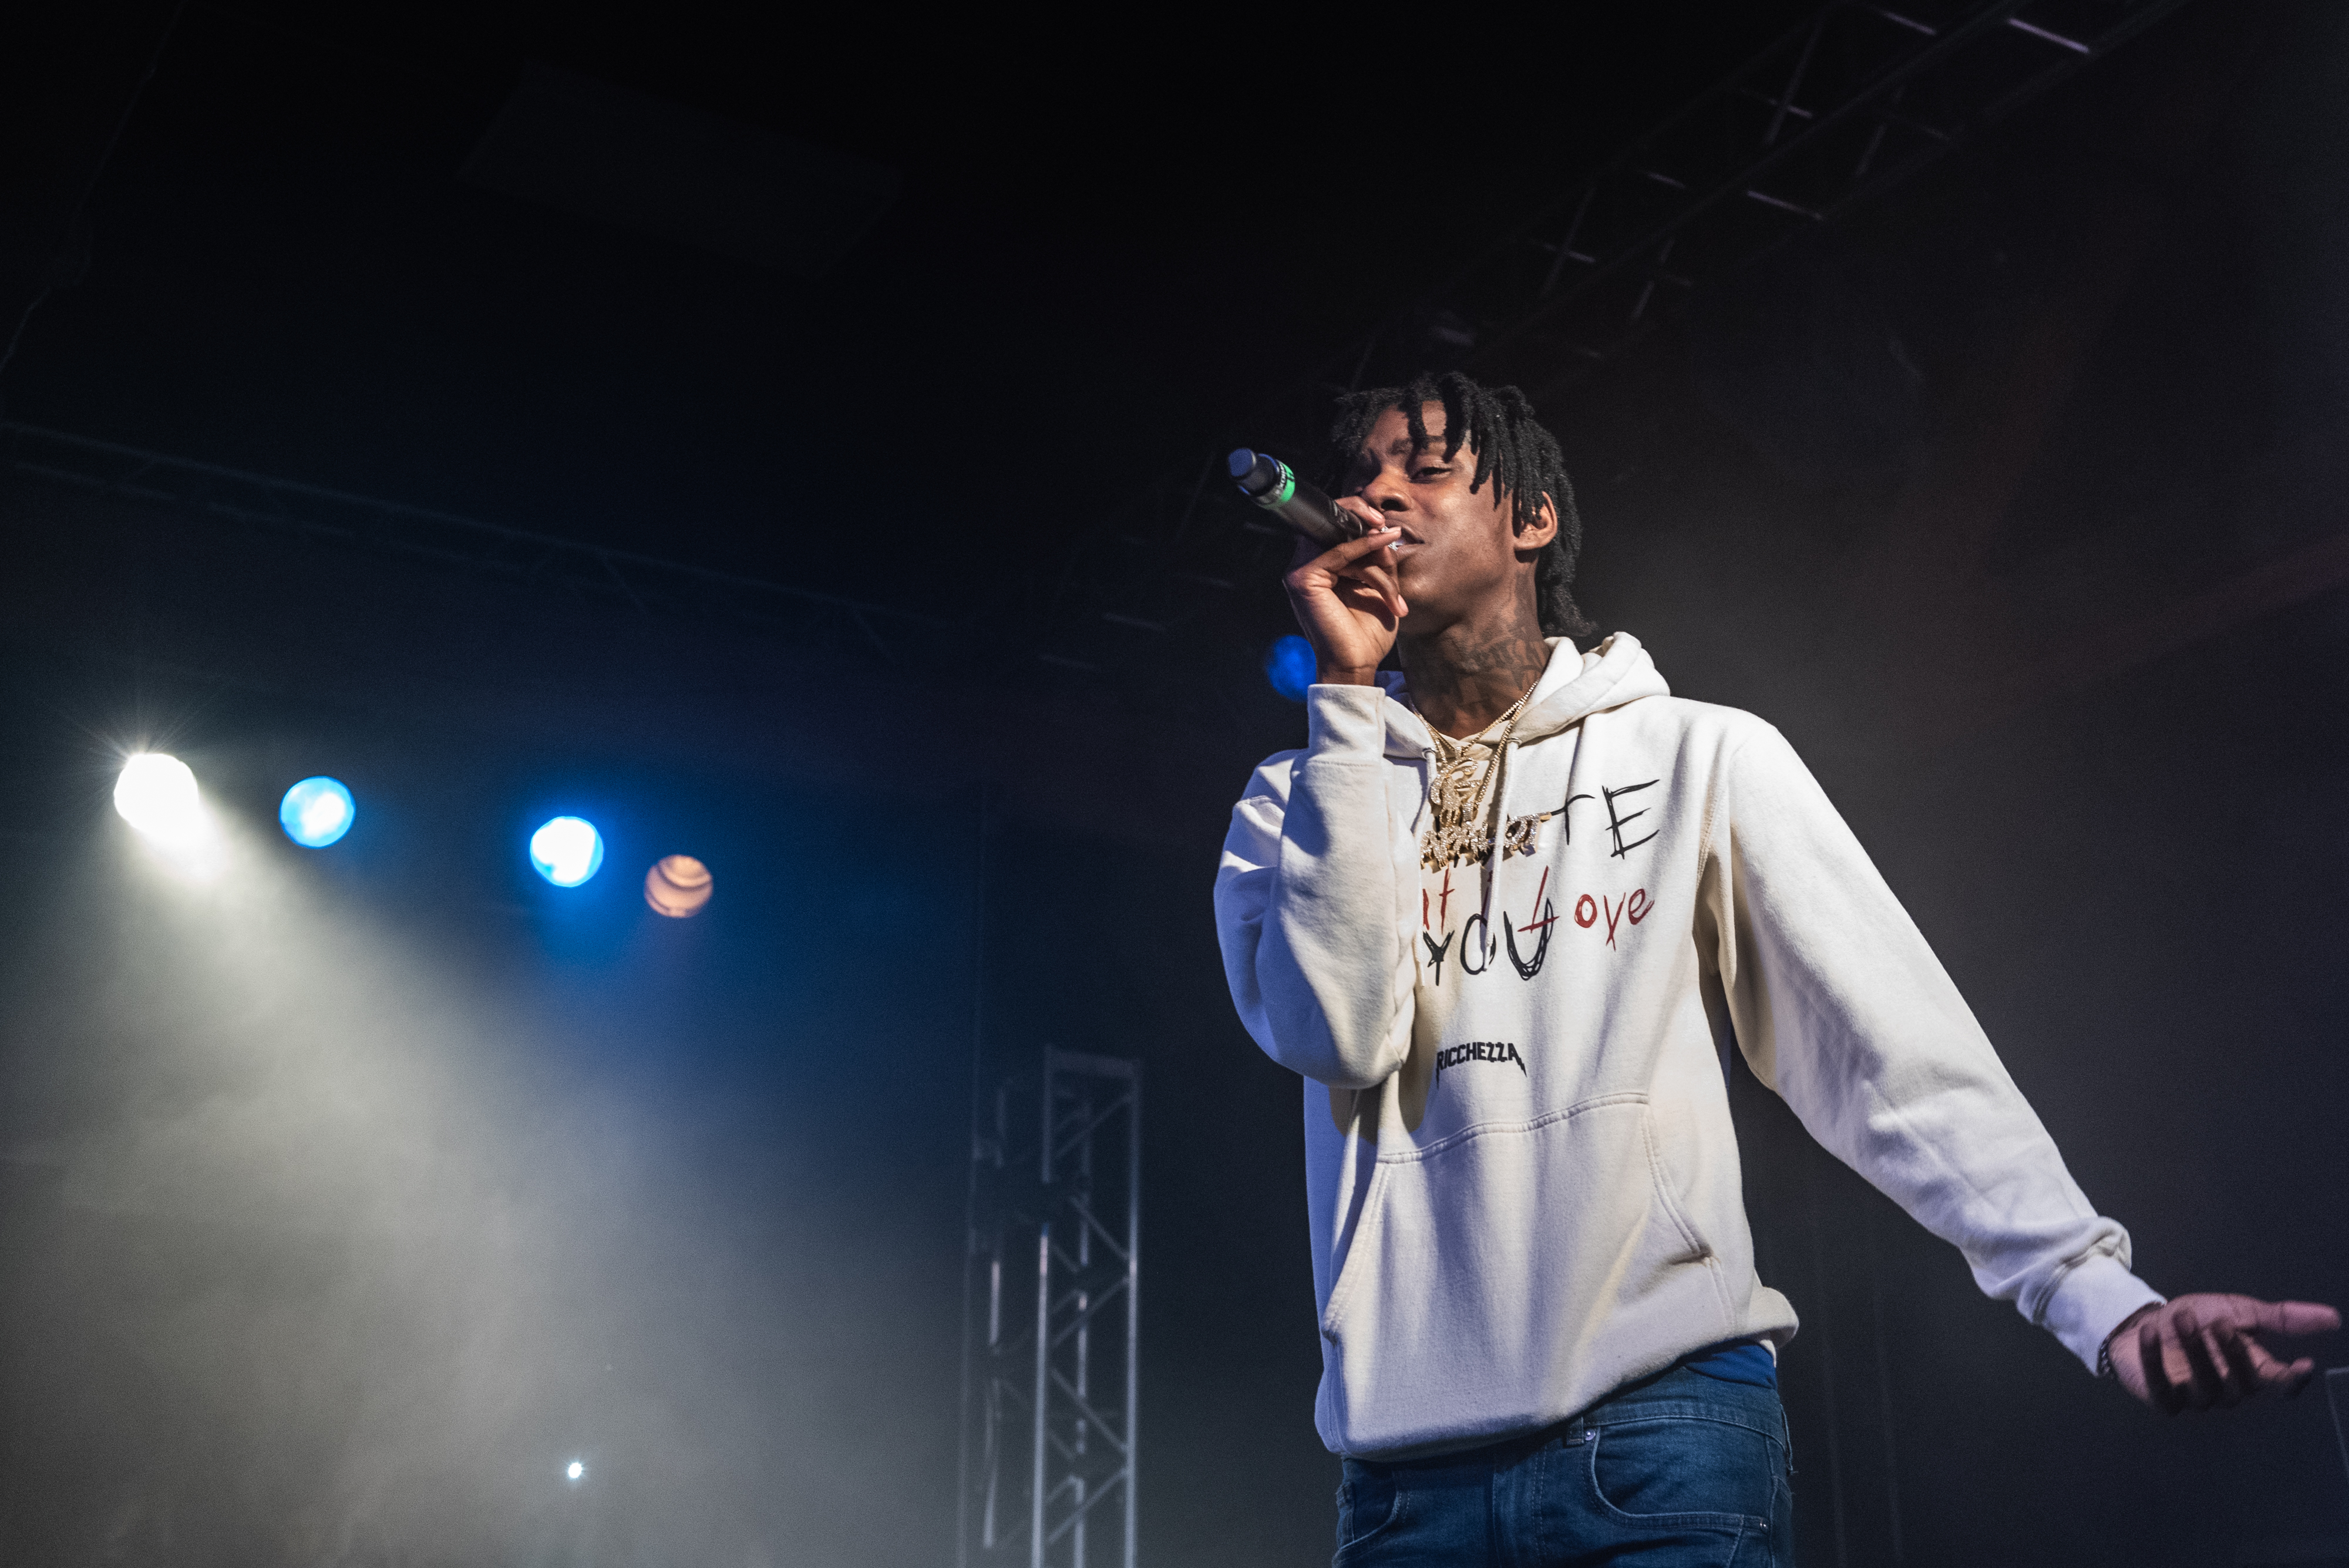 Polo G Raises His Price to $85,000 for a Feature Appearance